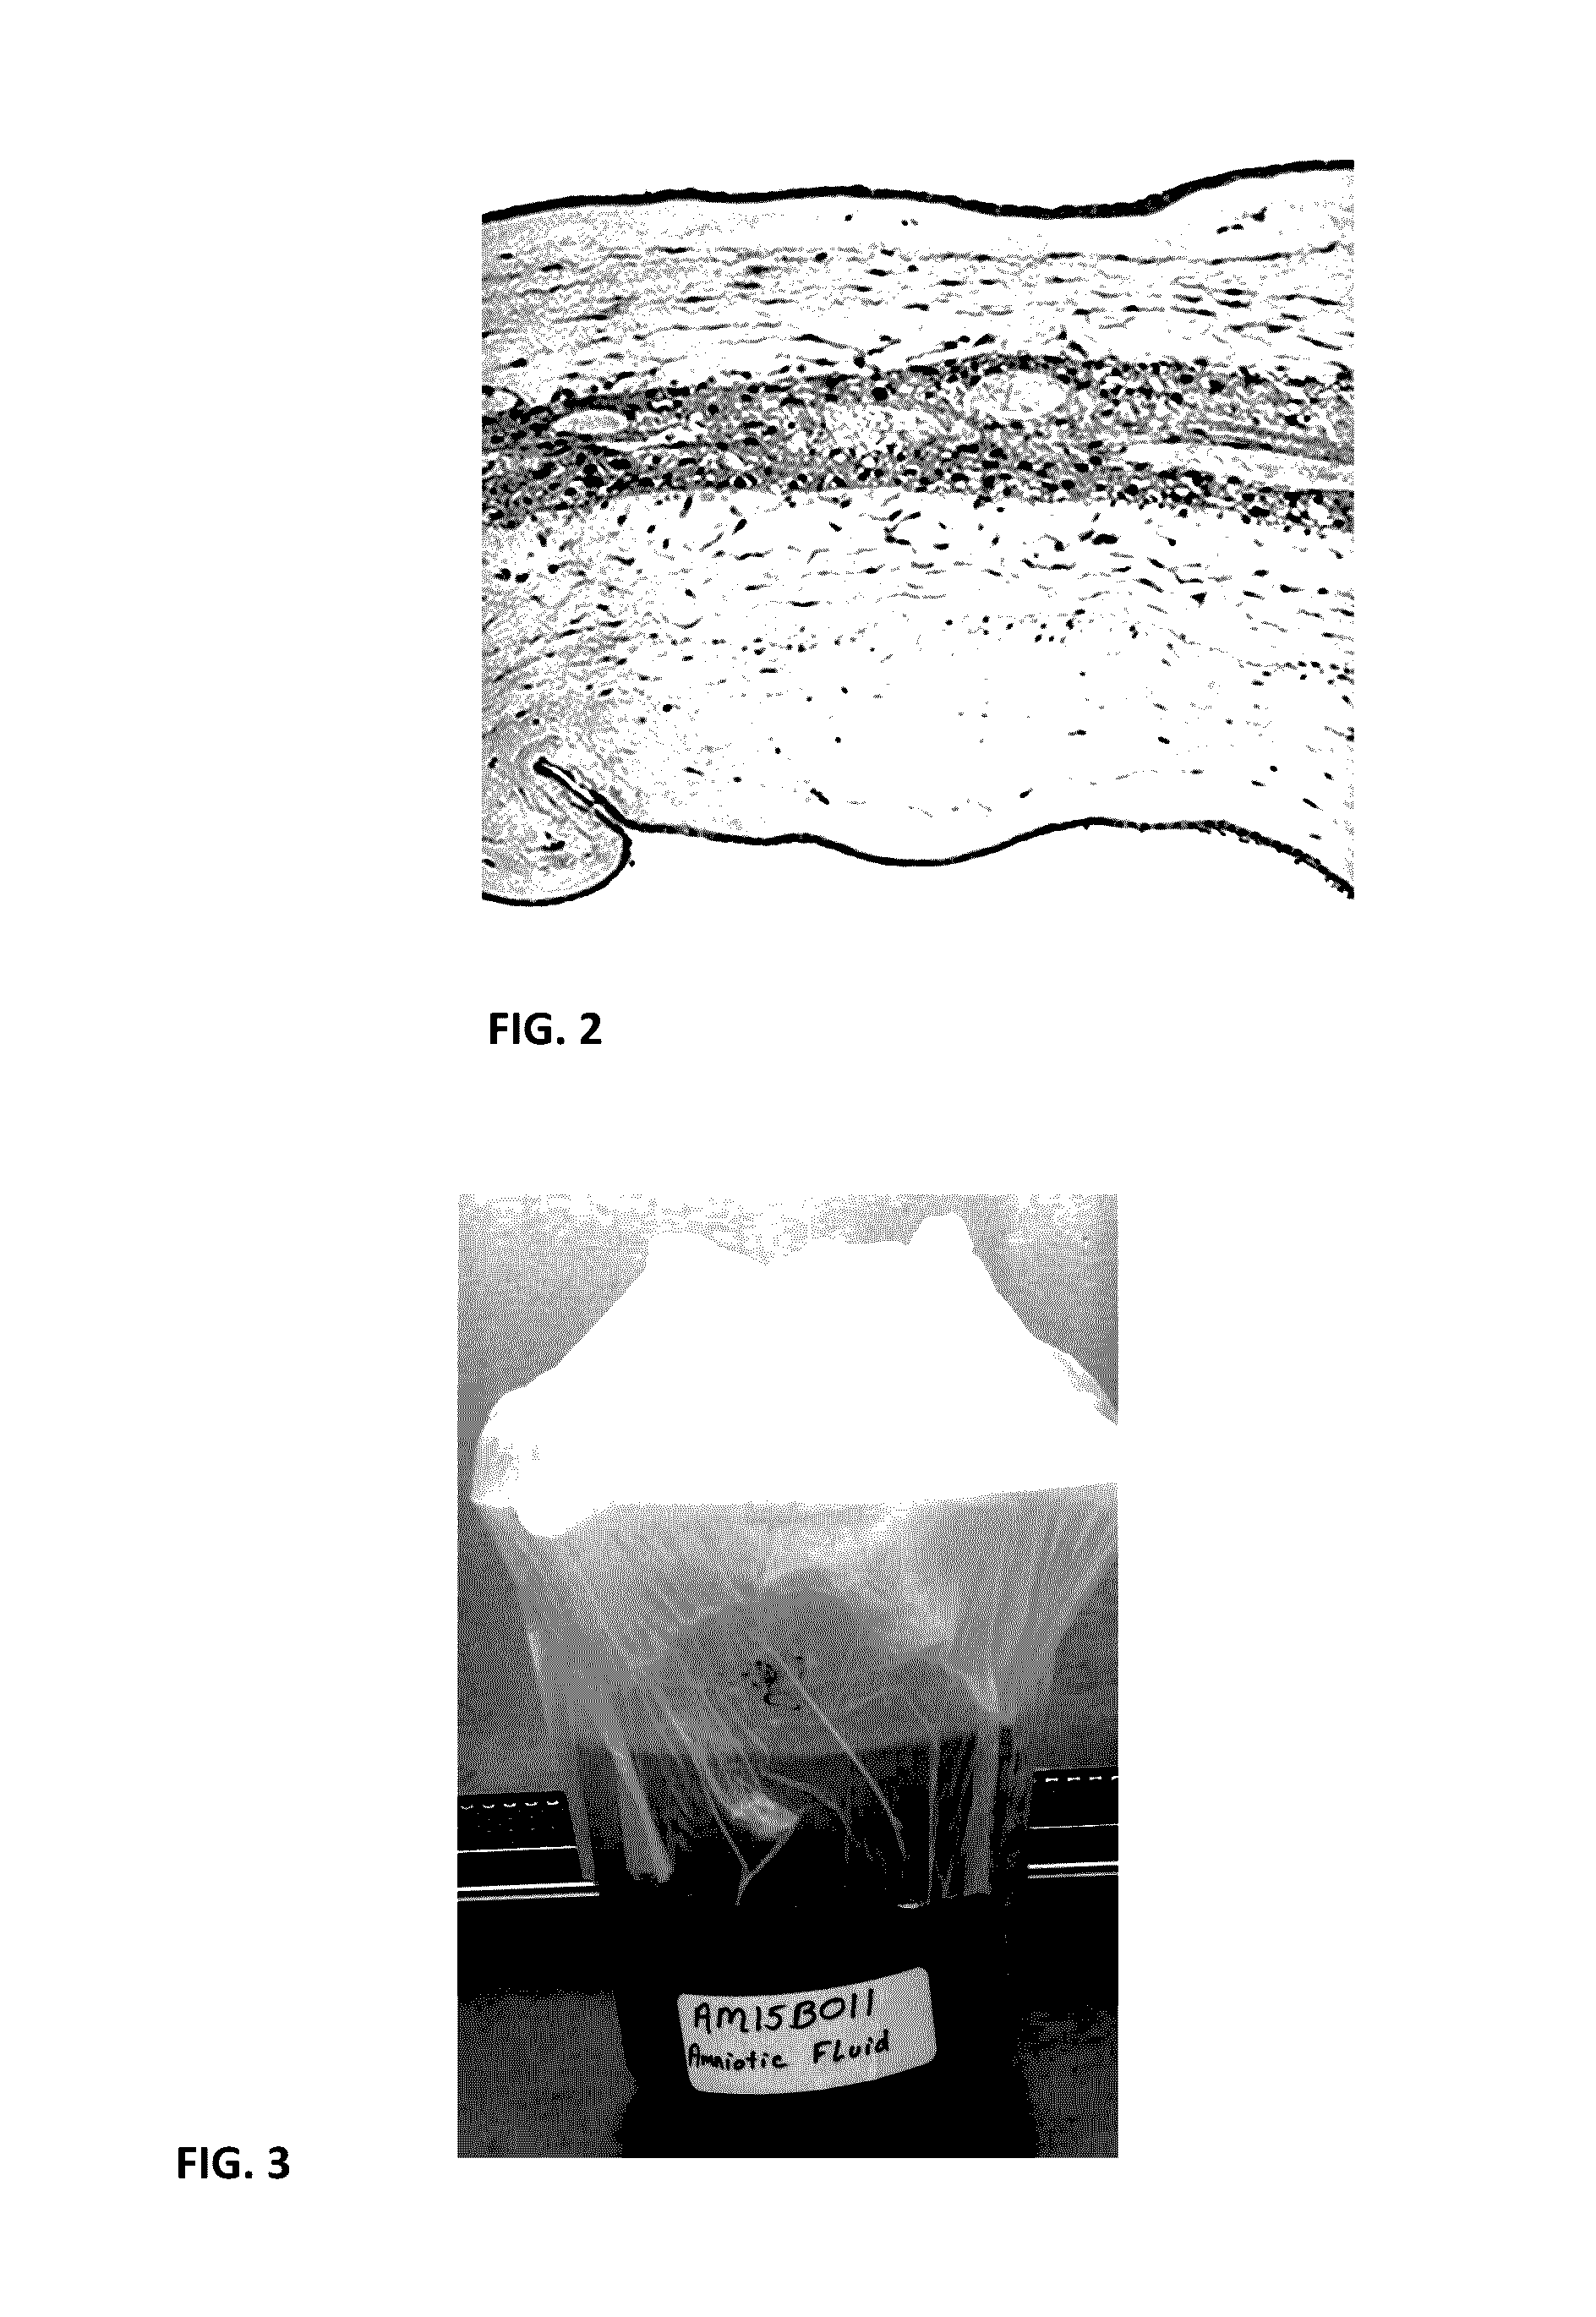 Acellular biologic composition and method of manufacture